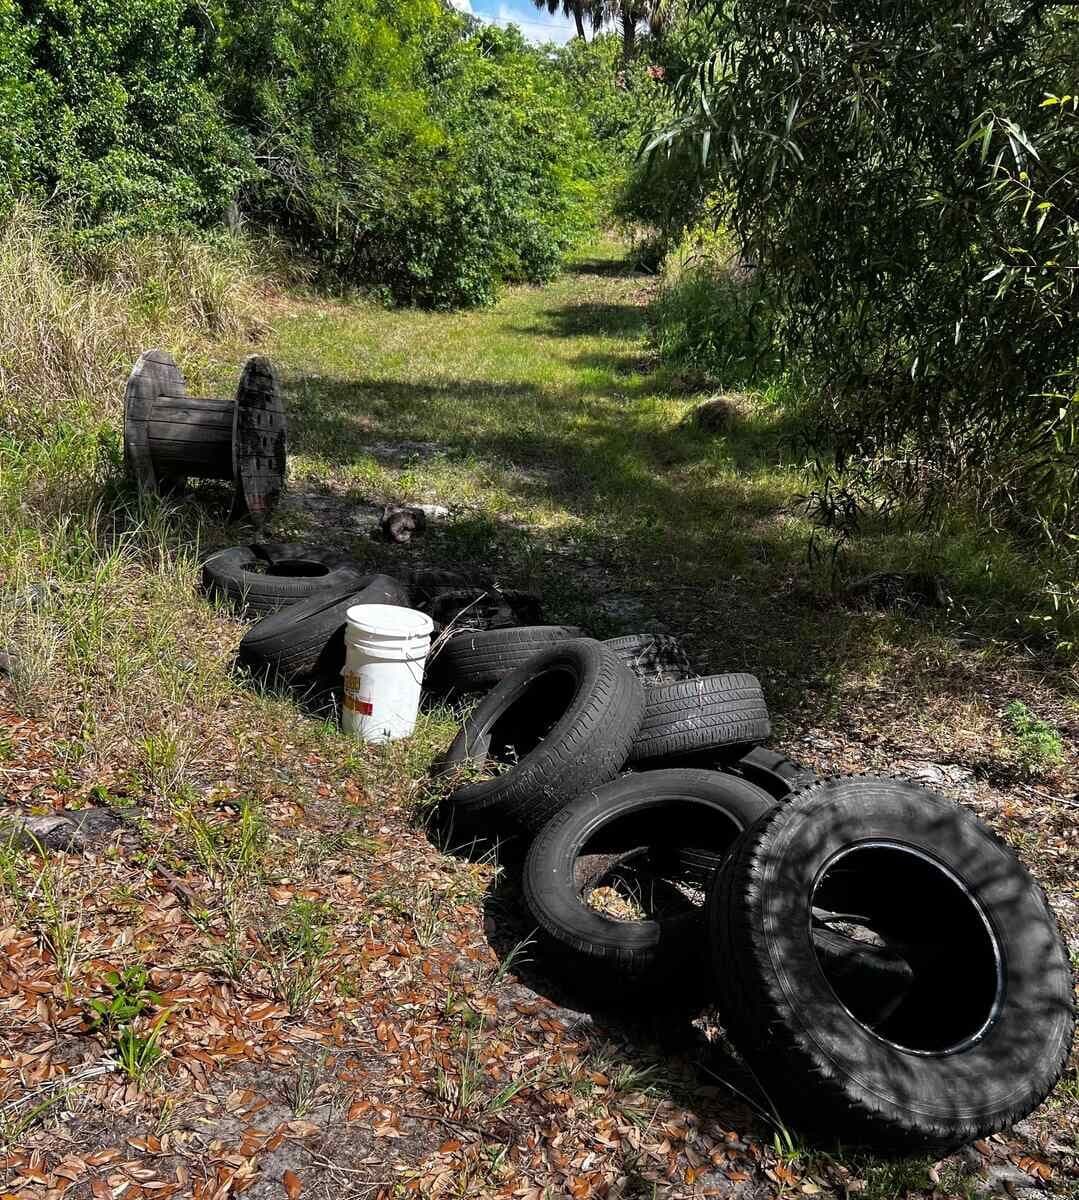 Volunteer cleanup of Alta Lake Park results in oil spill – Lake Wales News